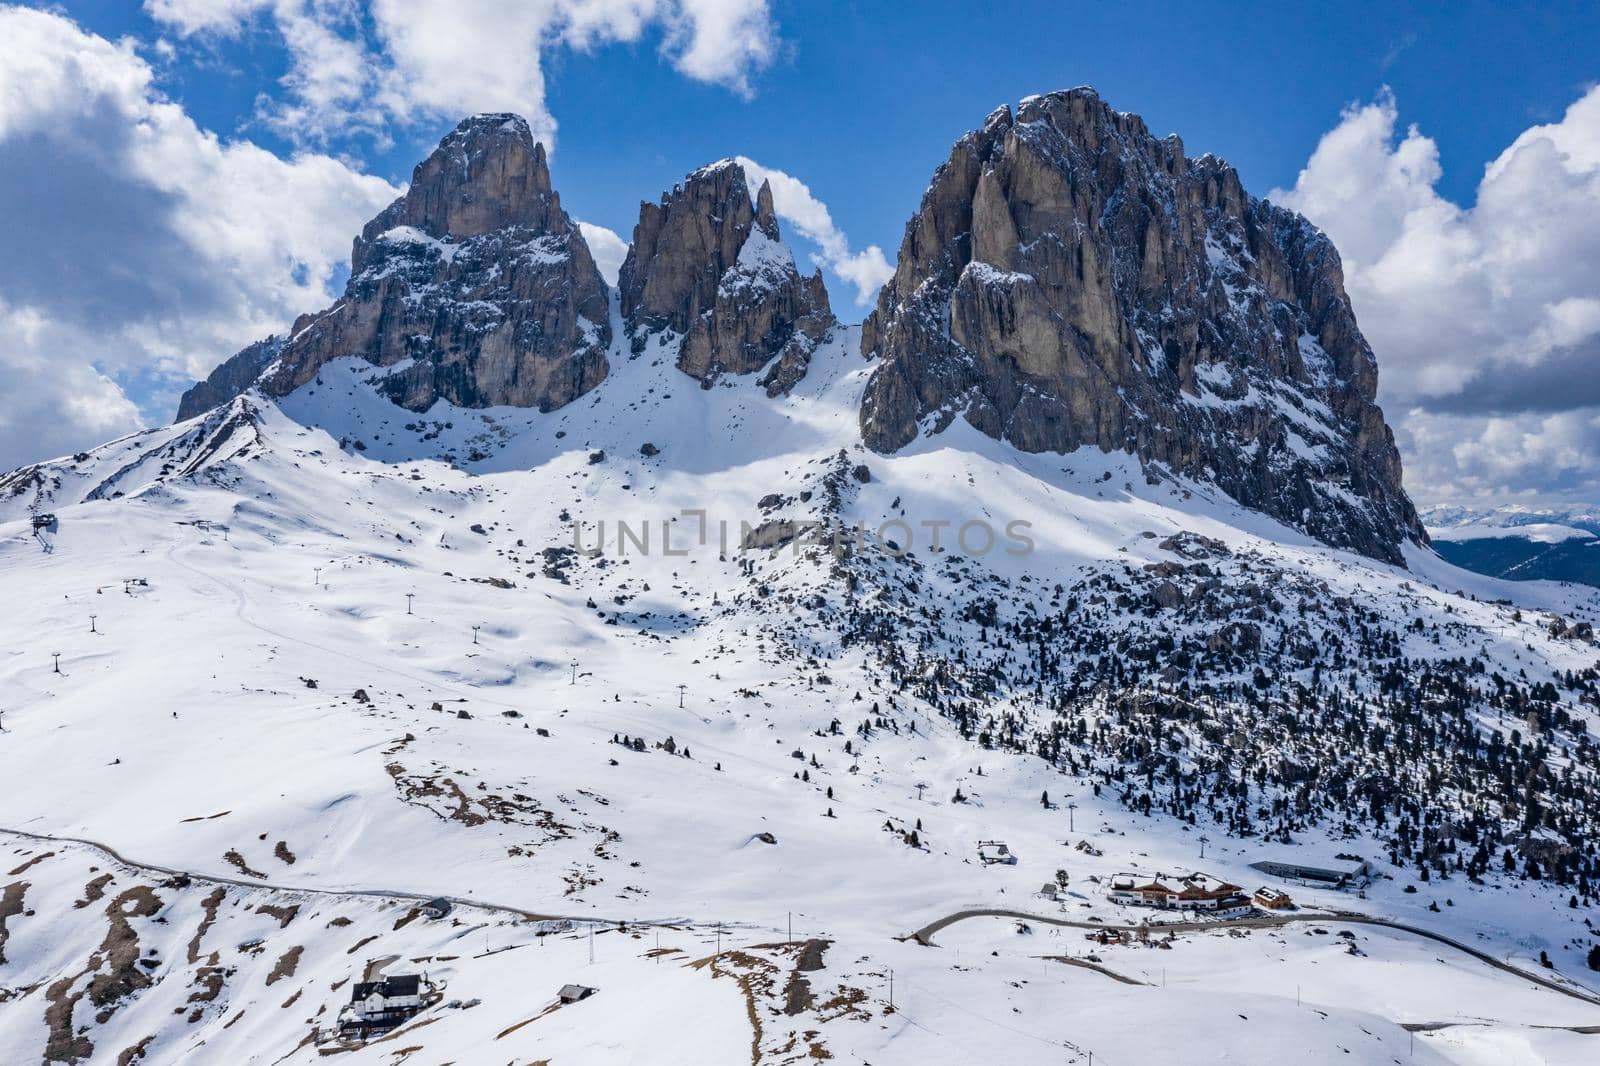 Aerial view of the Dolomites snow-covered mountains in Italy at sunny day, Canazei, drone view point, the twisted road, the blue sky with white clouds, famous place in the world, UNESCO monument, no people